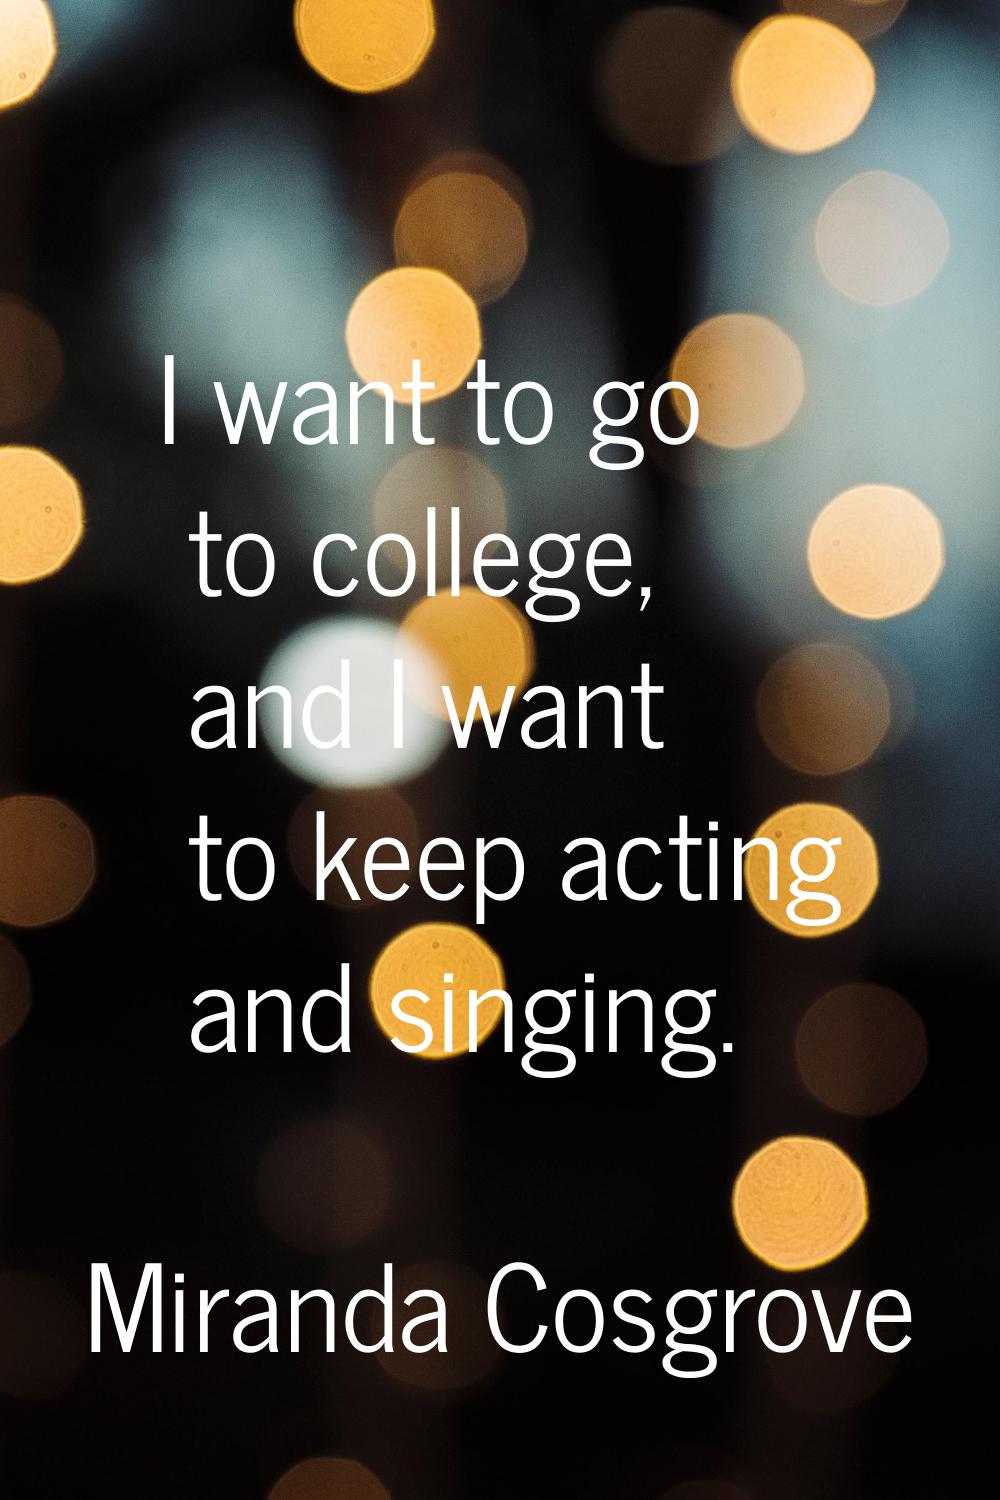 I want to go to college, and I want to keep acting and singing.